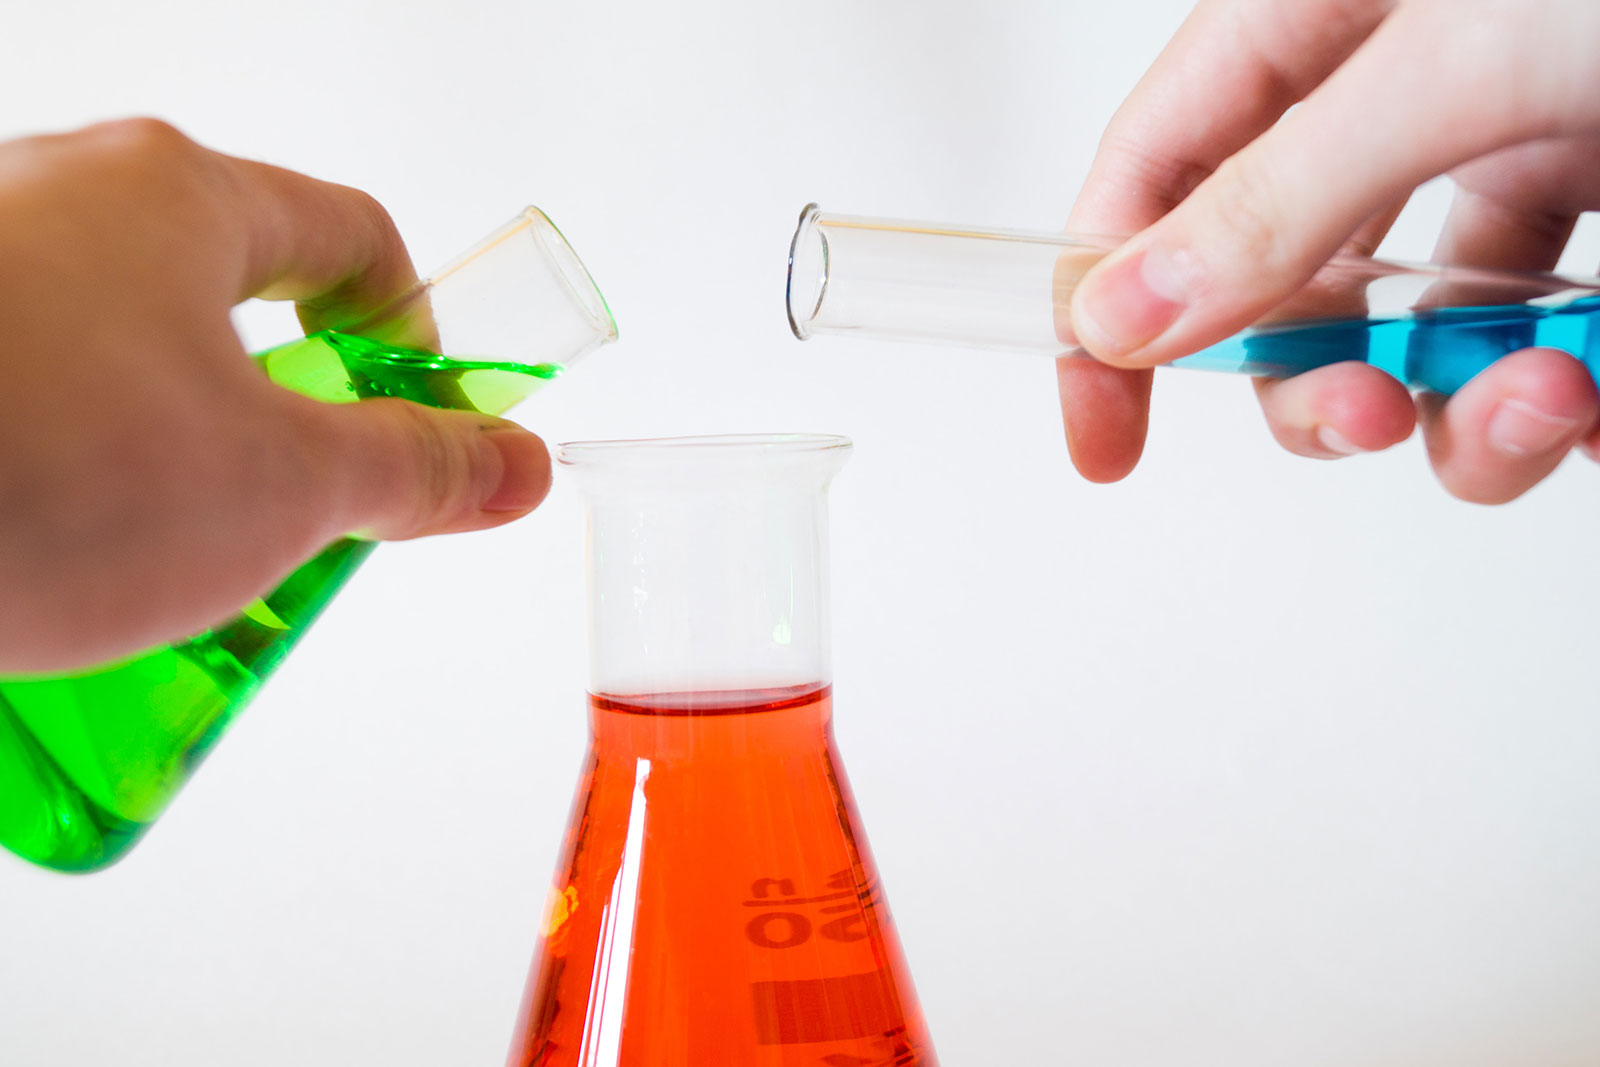 hands pouring liquids into glass flasks during a chemistry experiment